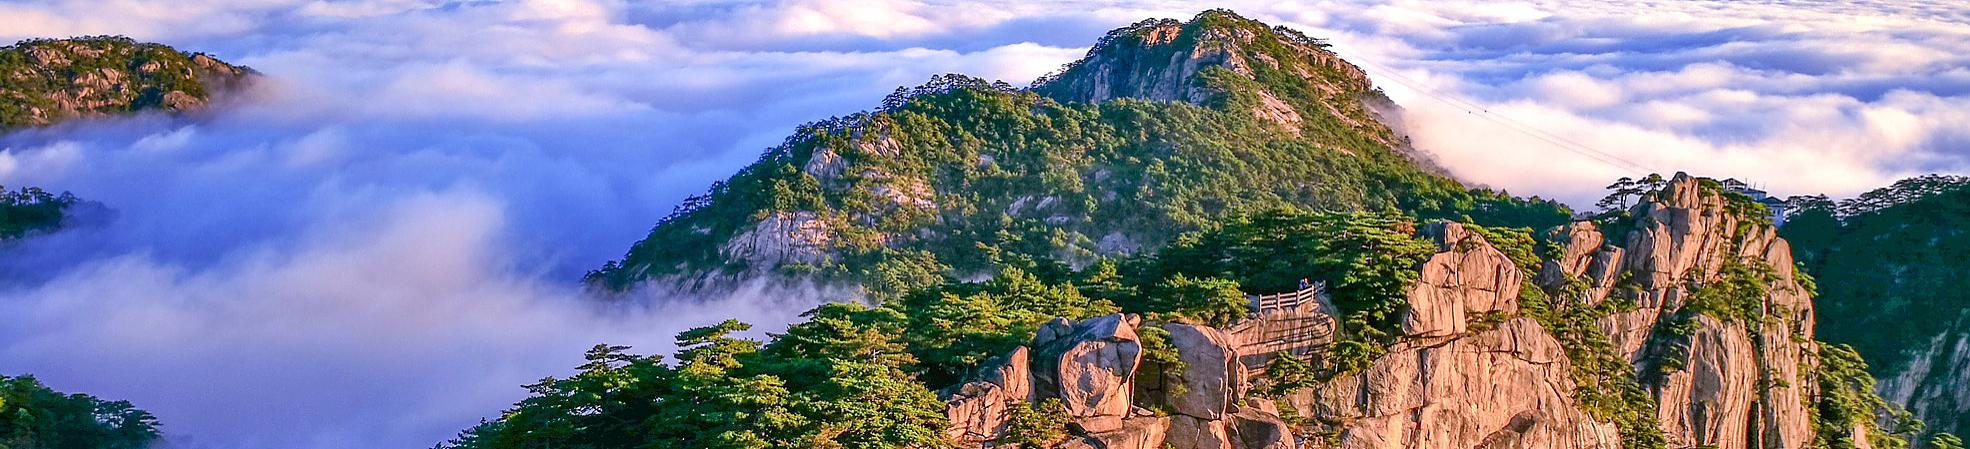 Hot Springs Scenic Area of Huangshan Mountain 